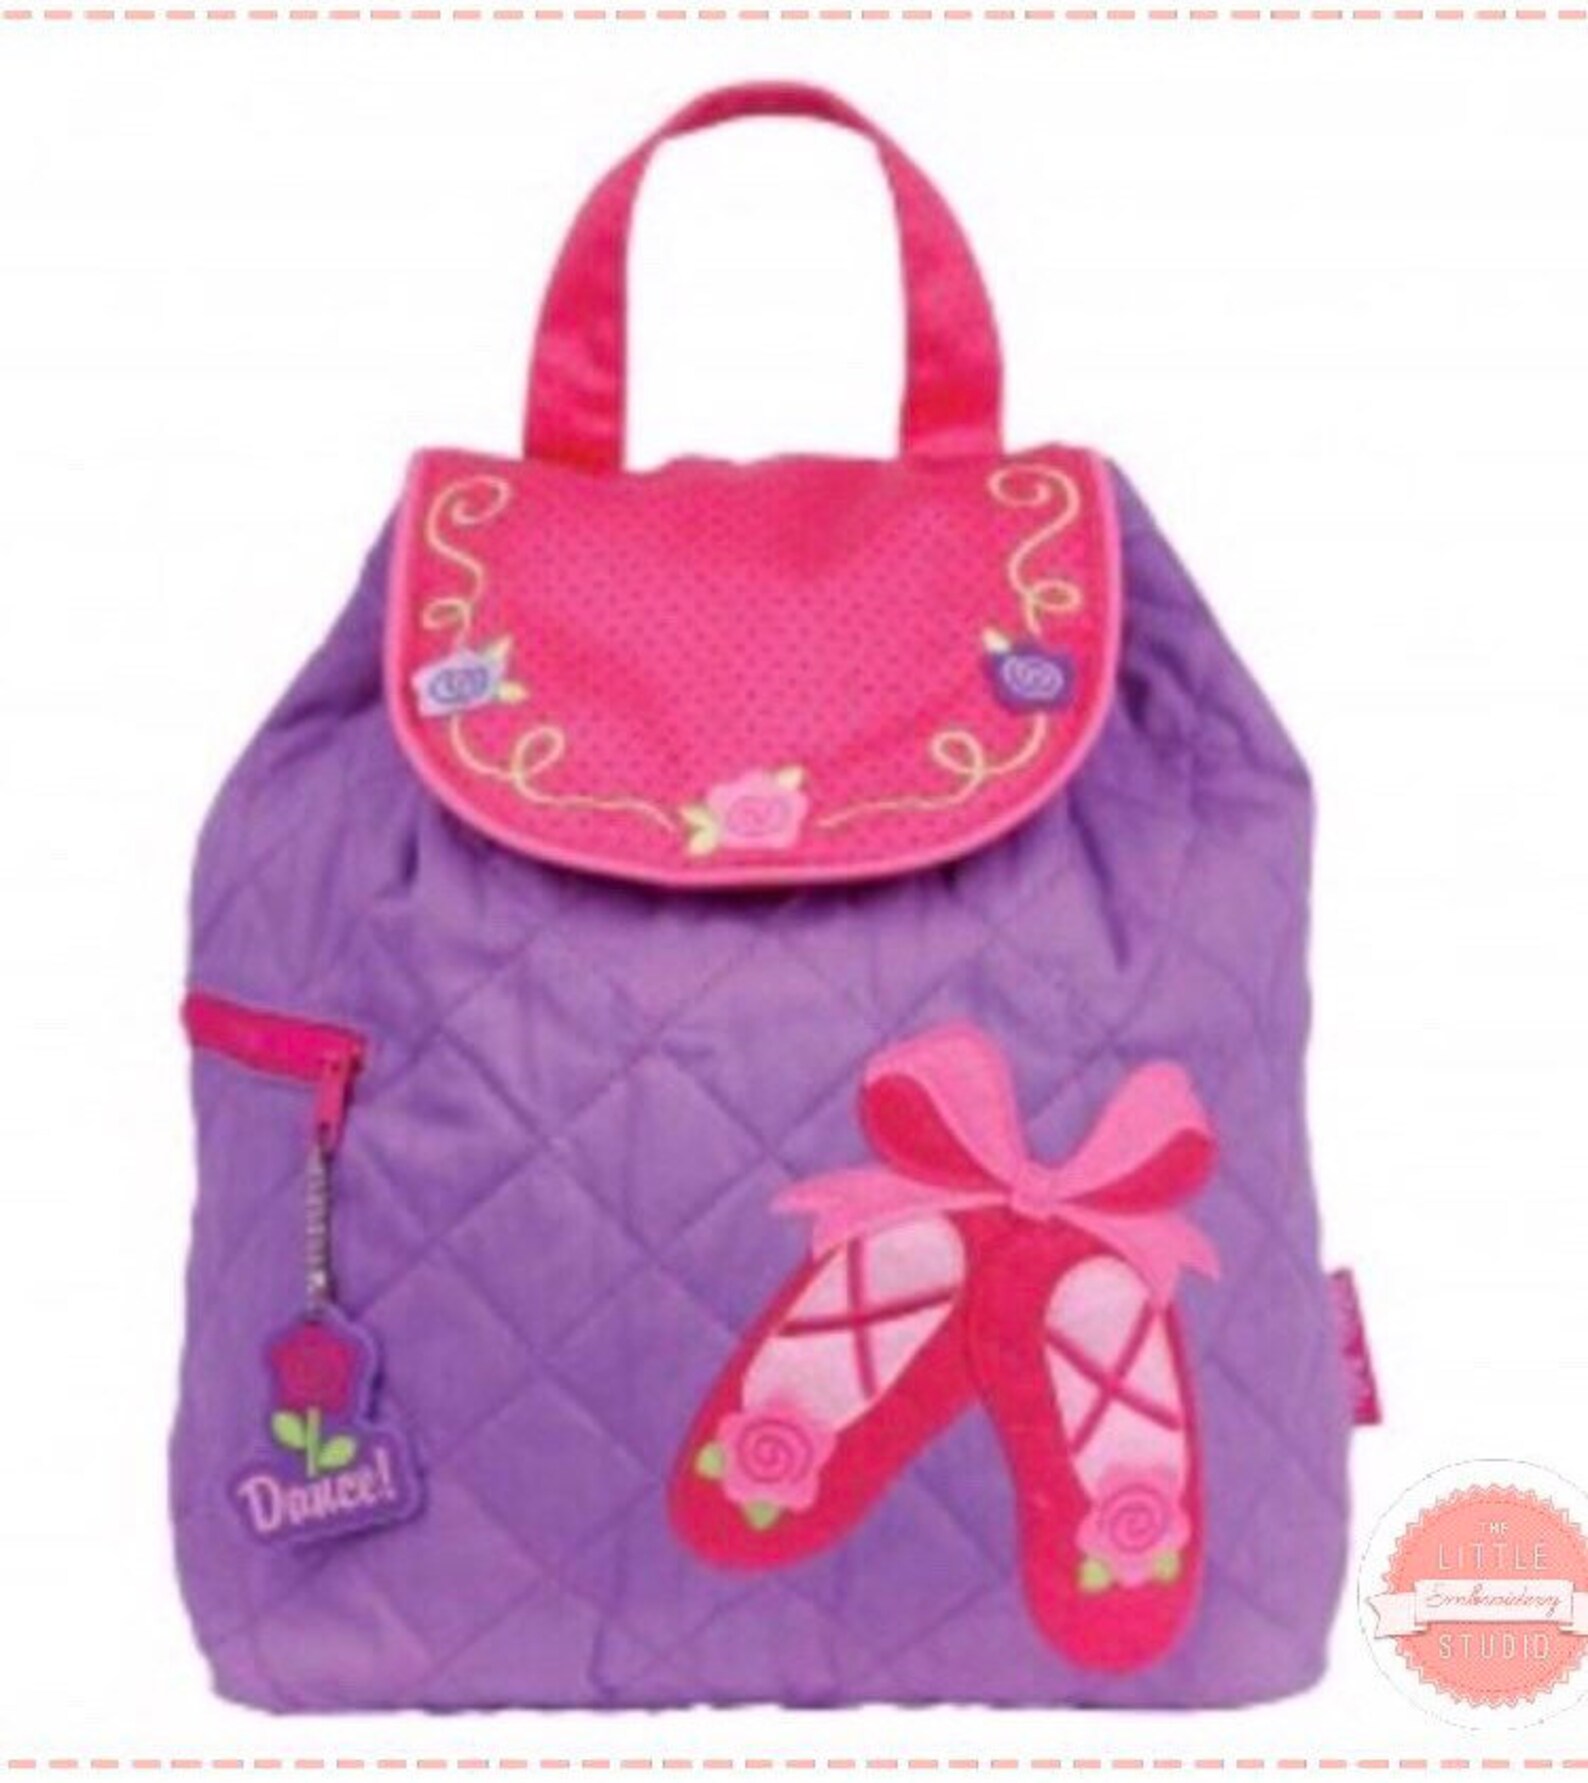 personalised toddler backpack in ballet shoe design with embroidered name.